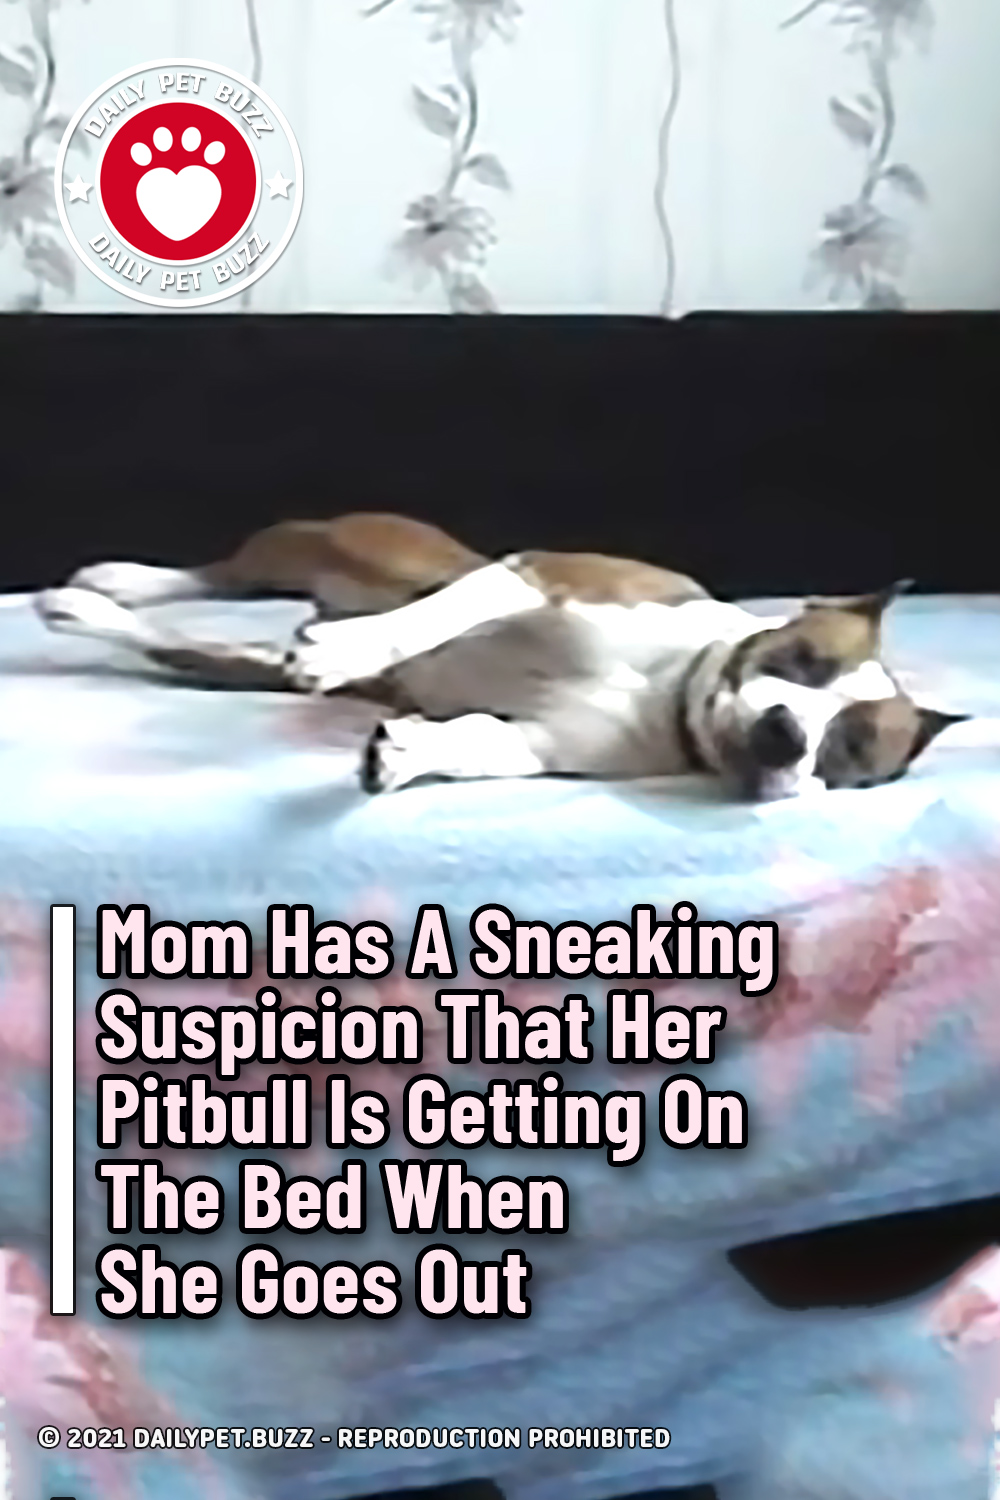 Mom Has A Sneaking Suspicion That Her Pitbull Is Getting On The Bed When She Goes Out